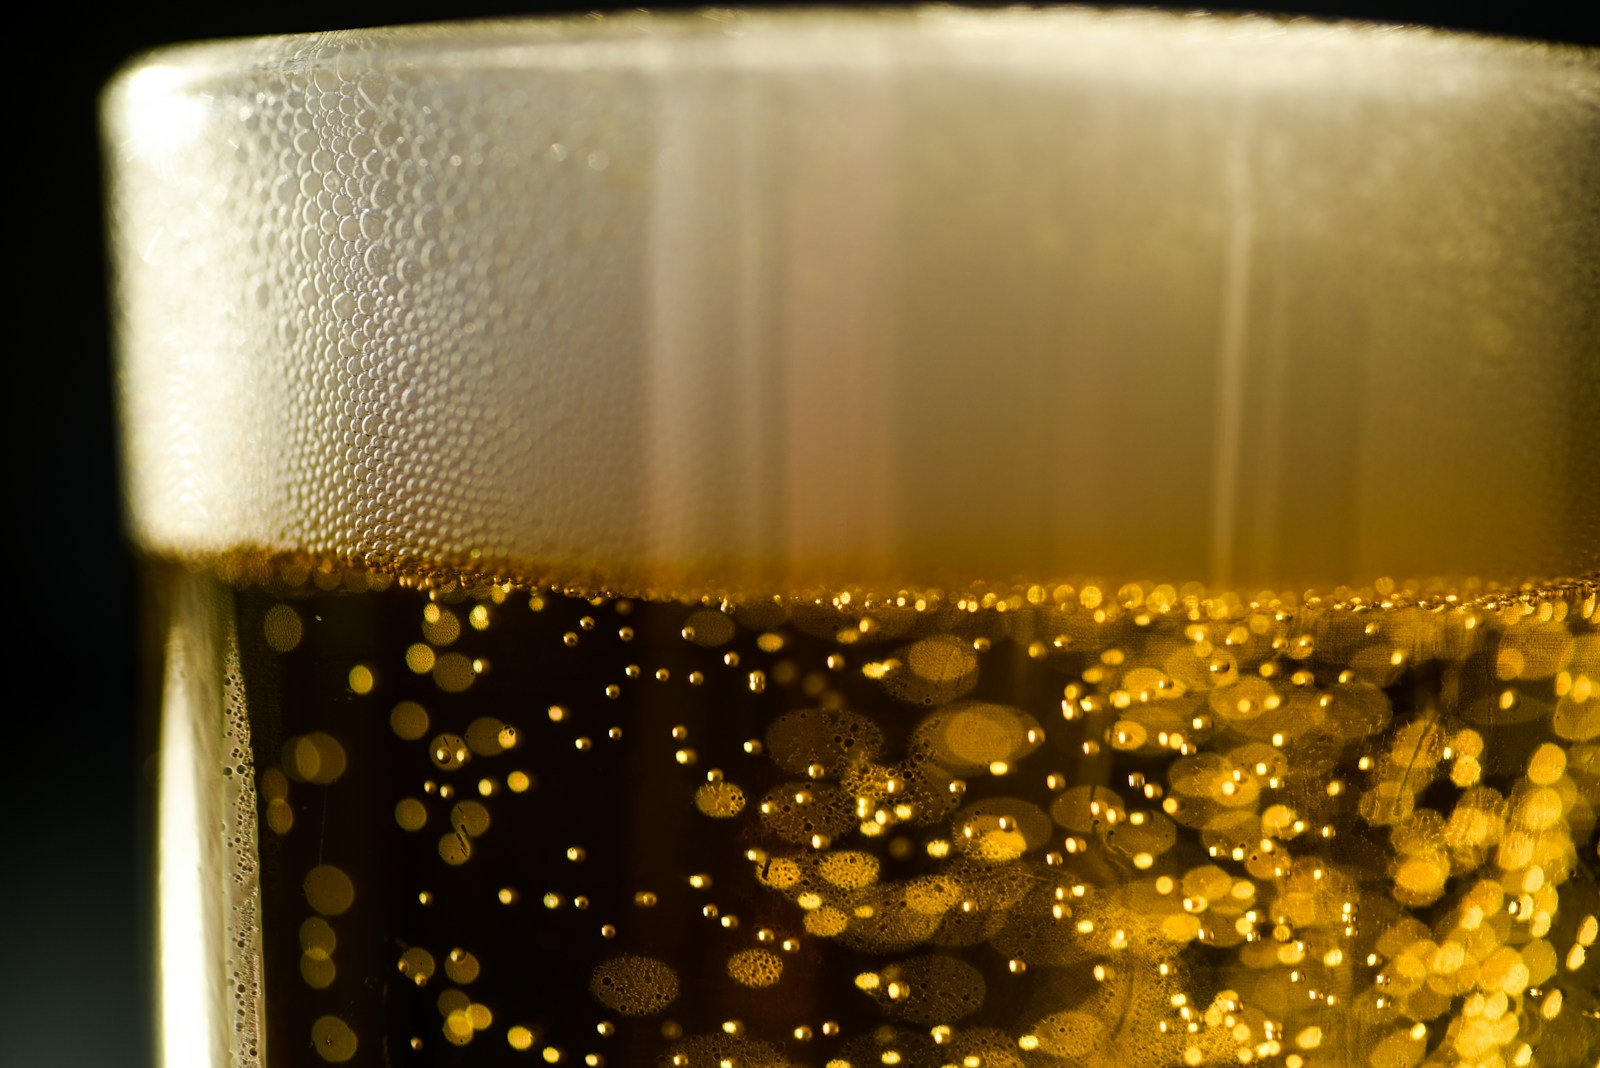 a close up of a glass of beer